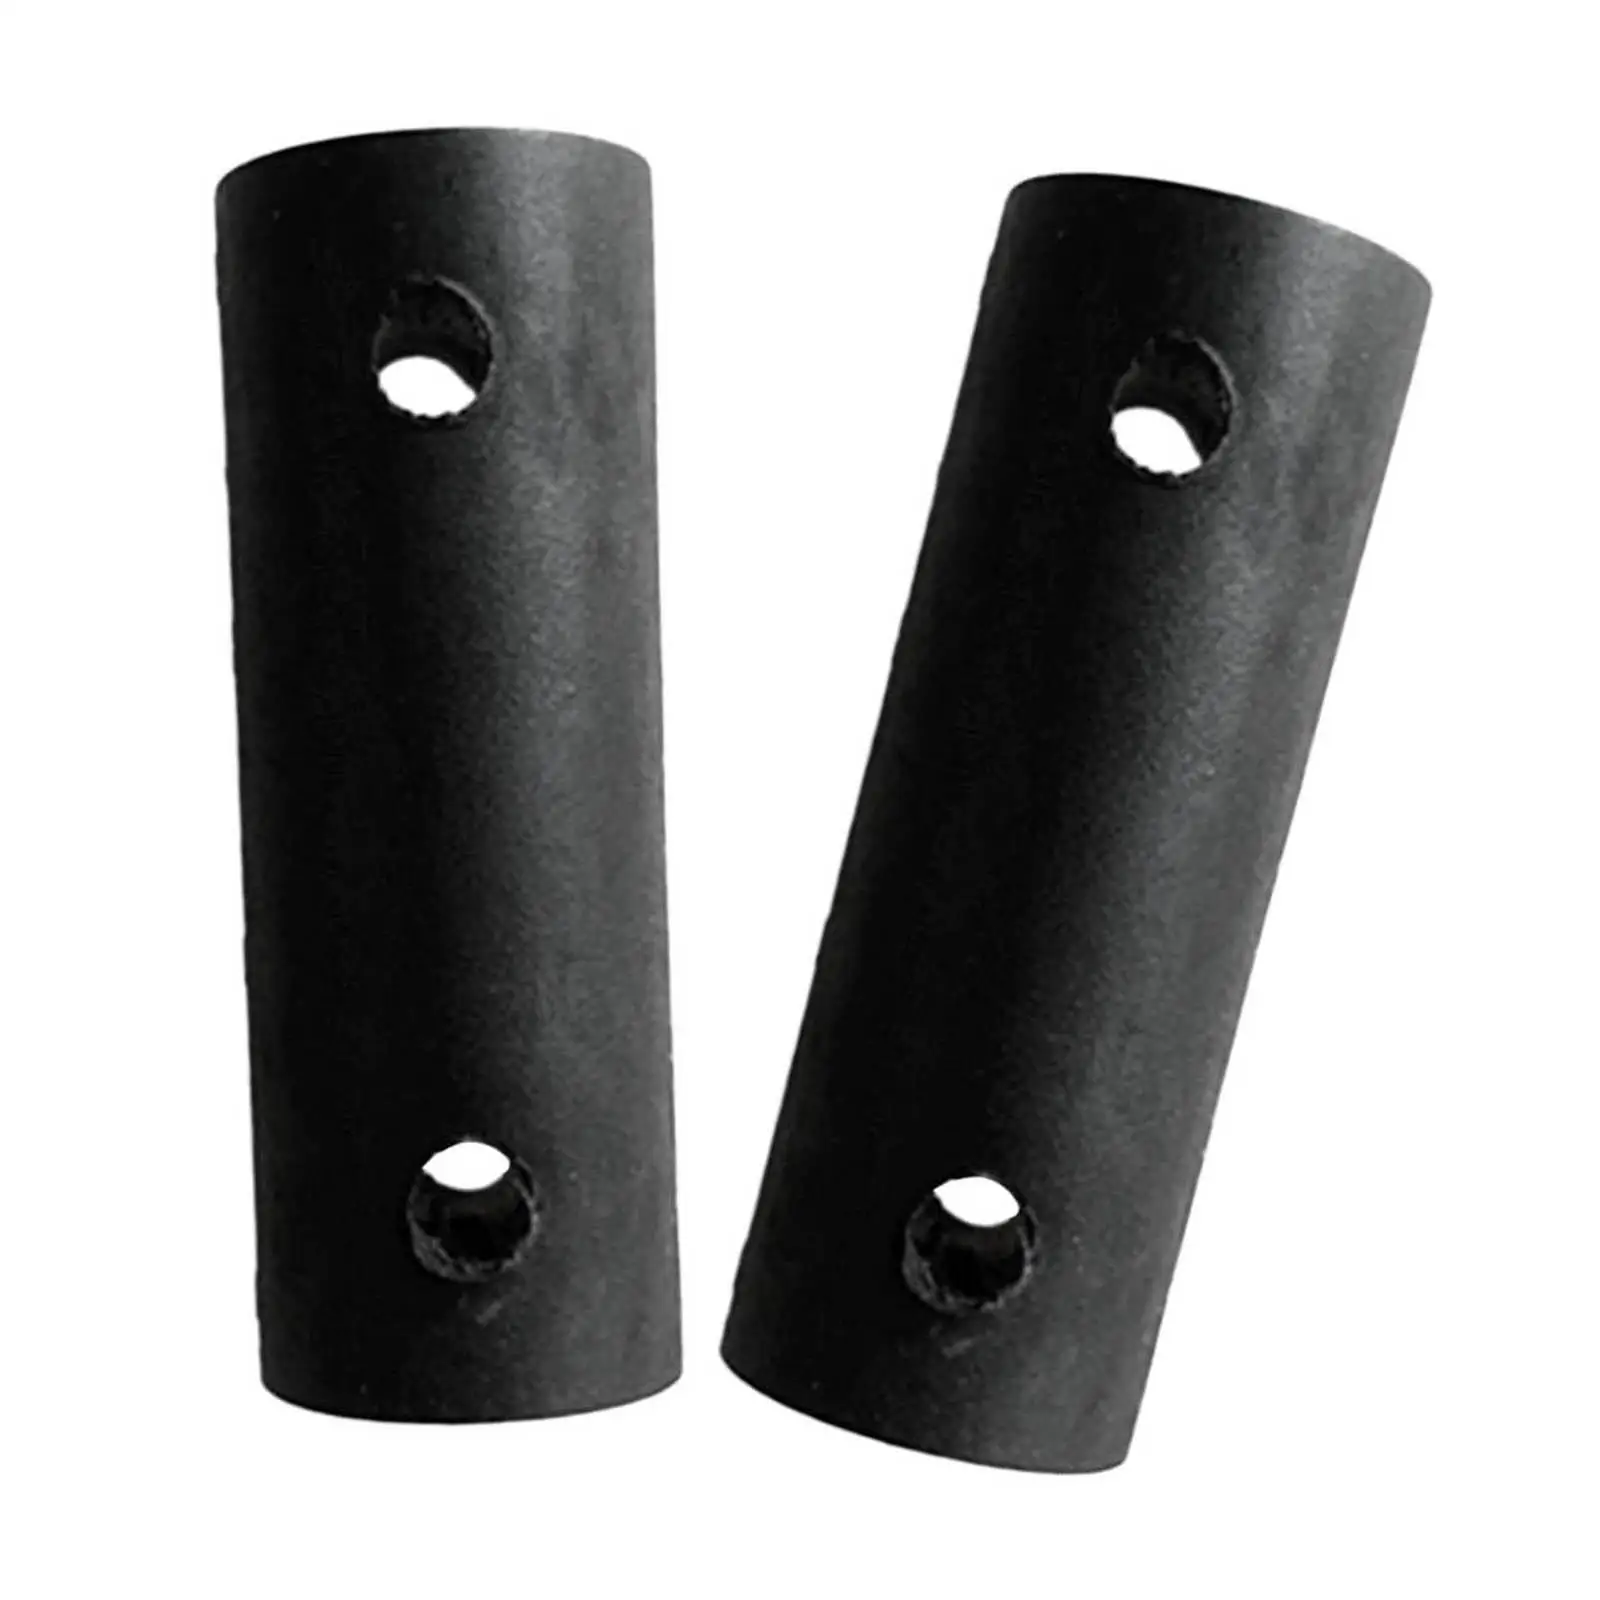 2x Universal Strong Spare Tendon Joint Mast Foot Bushing Components Black